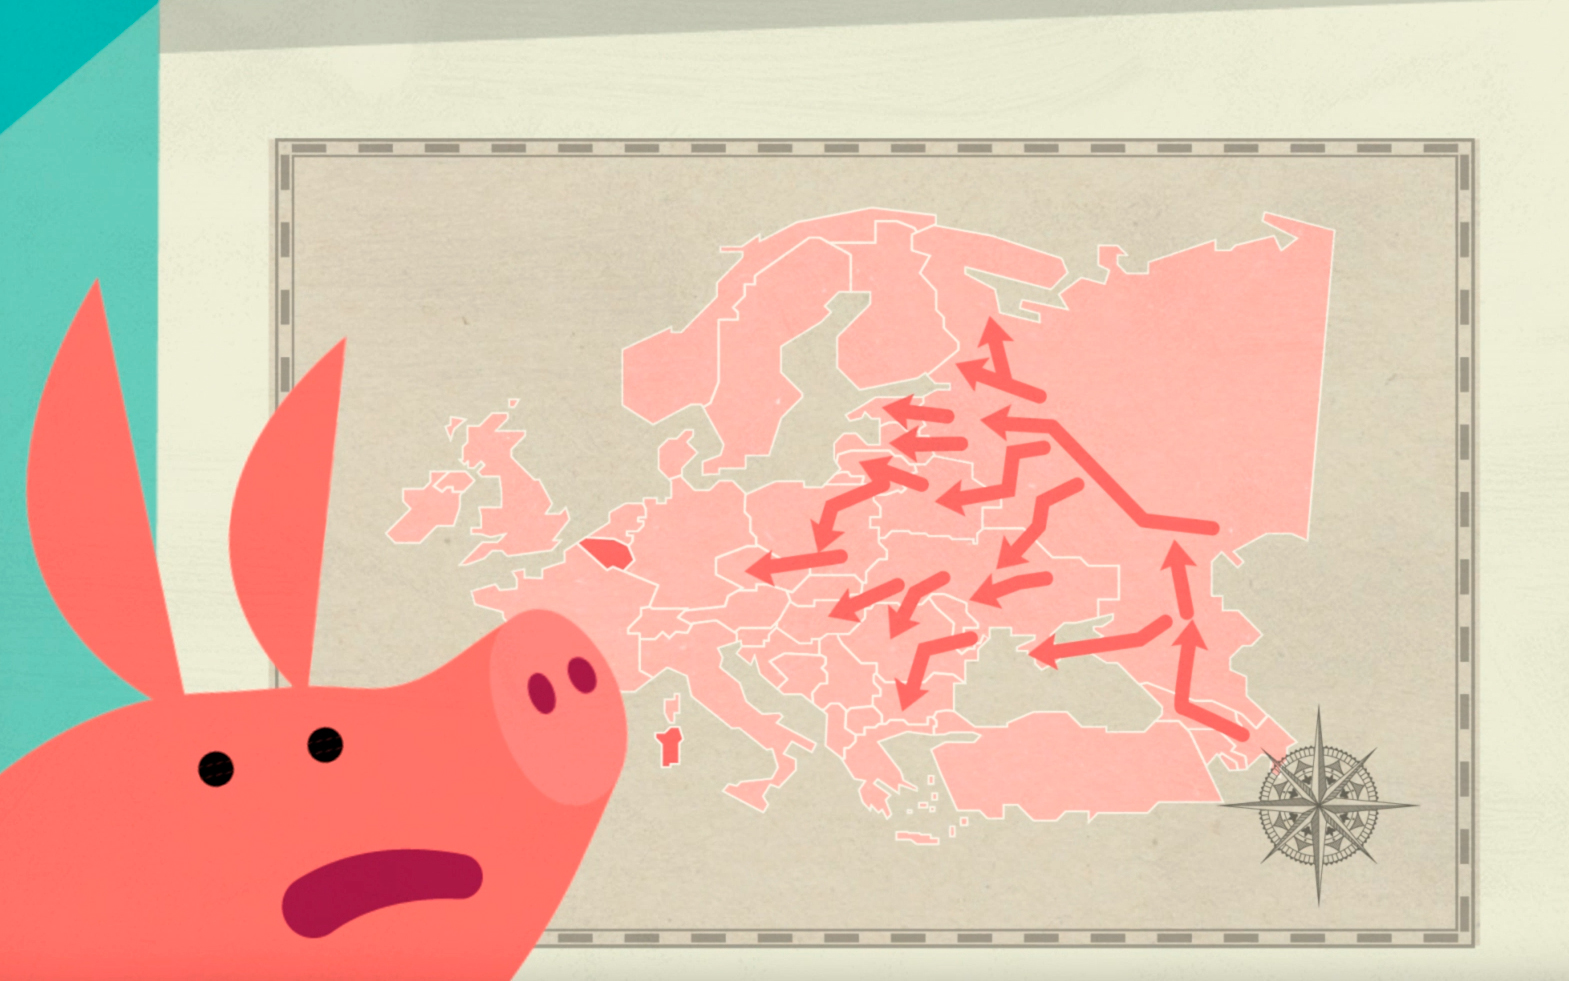 Do not bring African swine fever to Finland